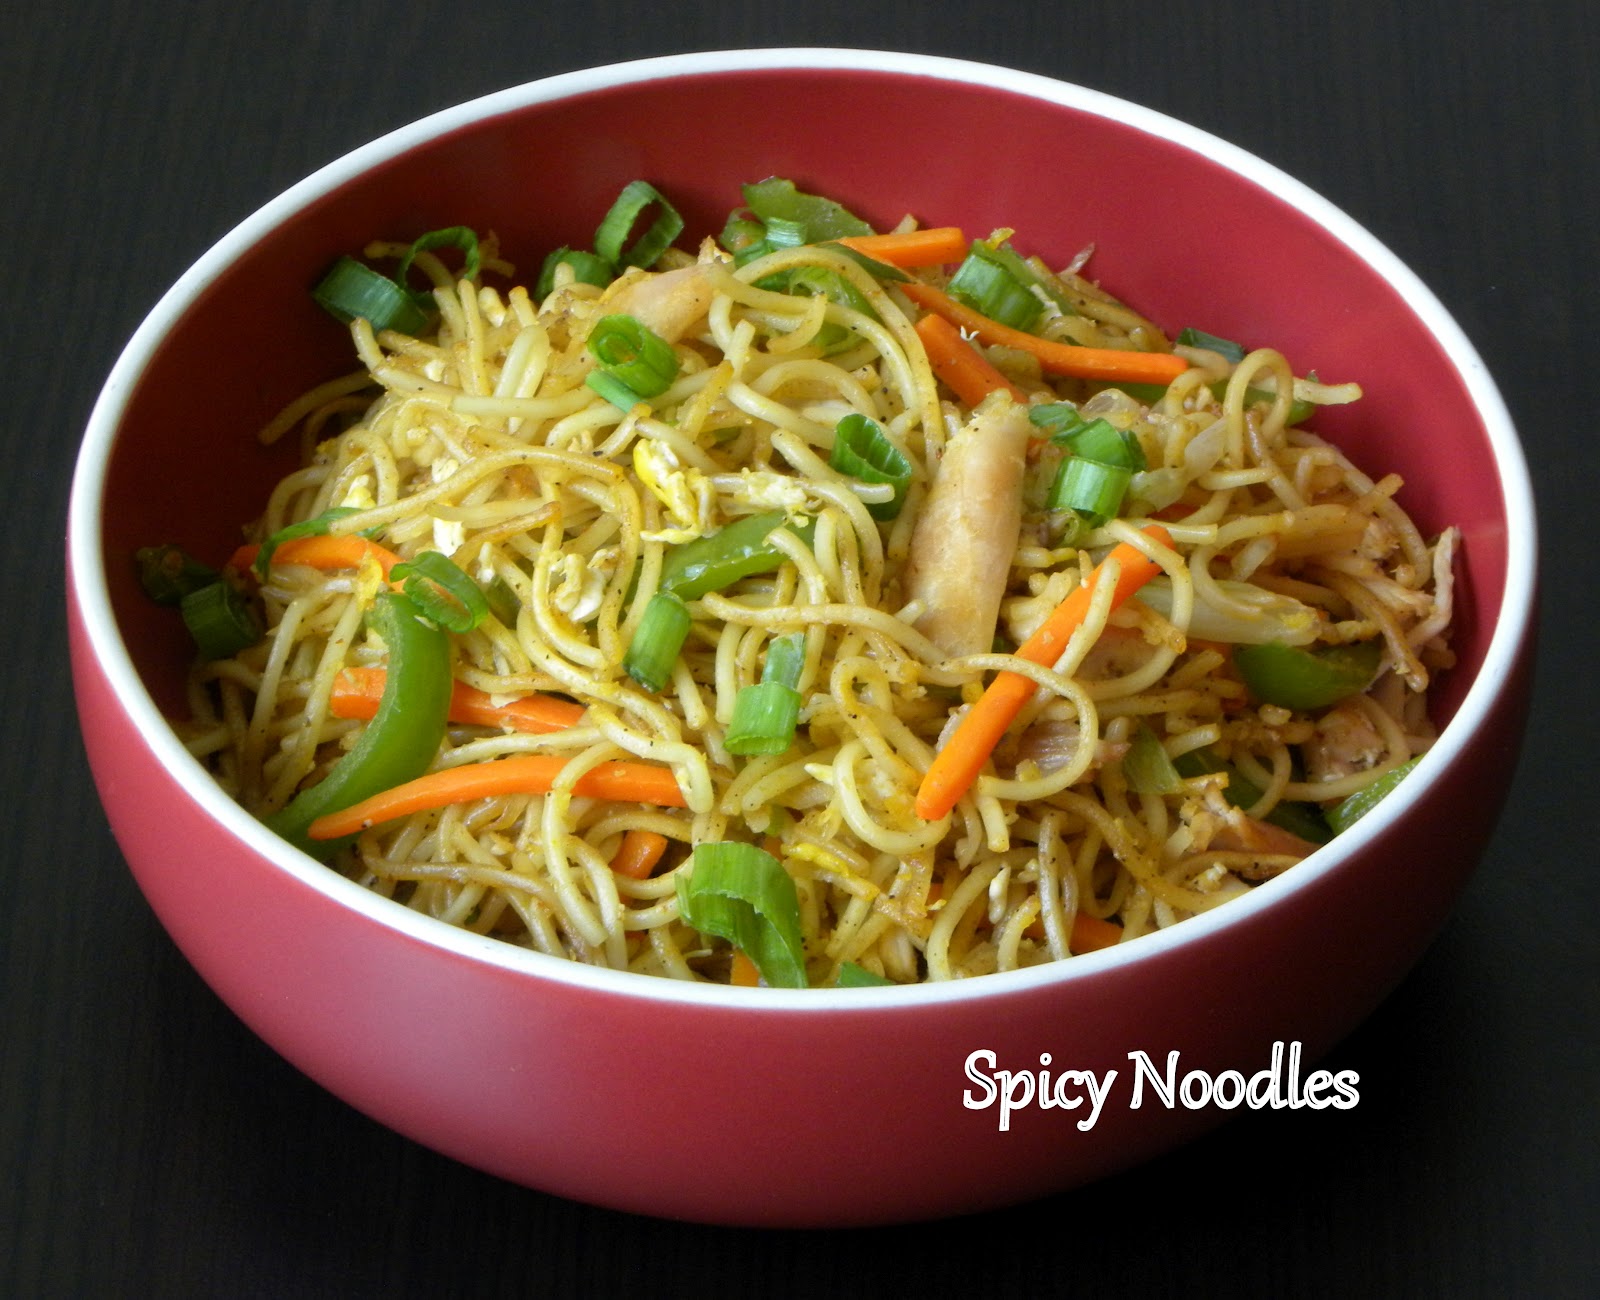 Tasty Treats: Spicy Noodles